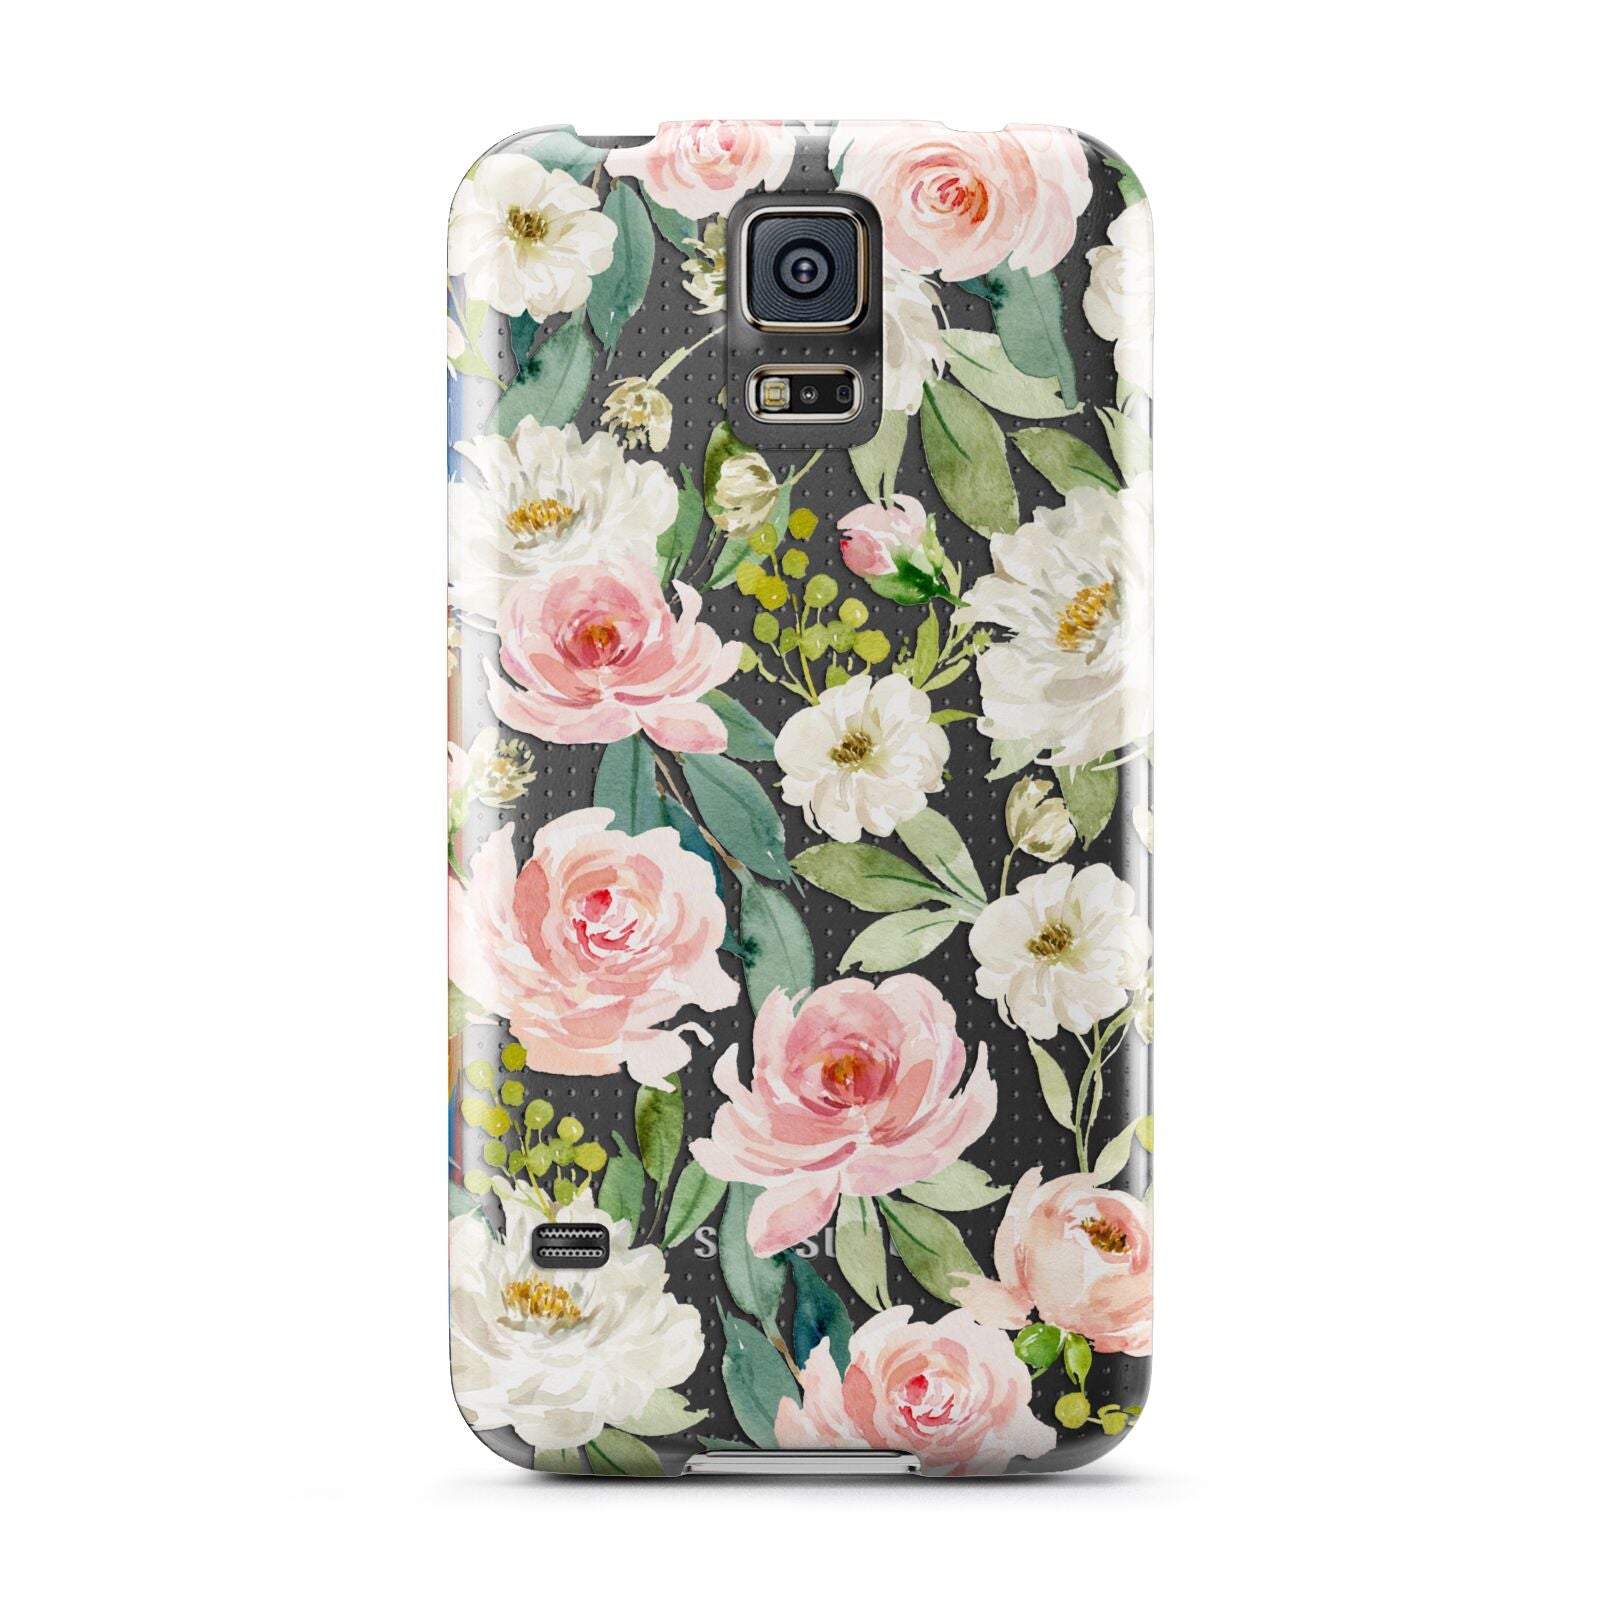 Watercolour Peonies Roses and Foliage Samsung Galaxy S5 Case